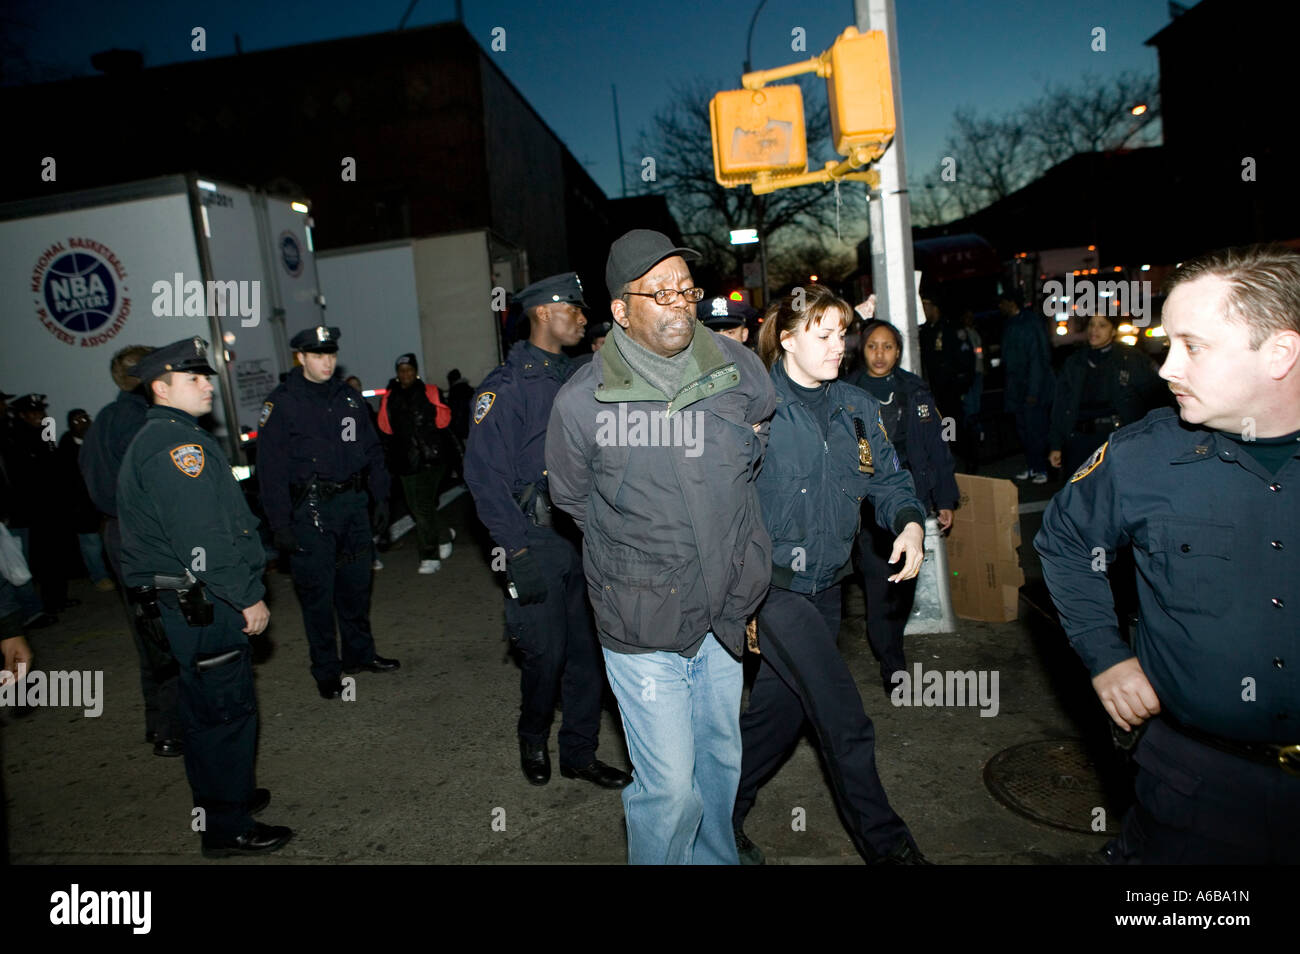 NYPD police officers arrest a man in New York Cty USA Dec 2006 Stock Photo